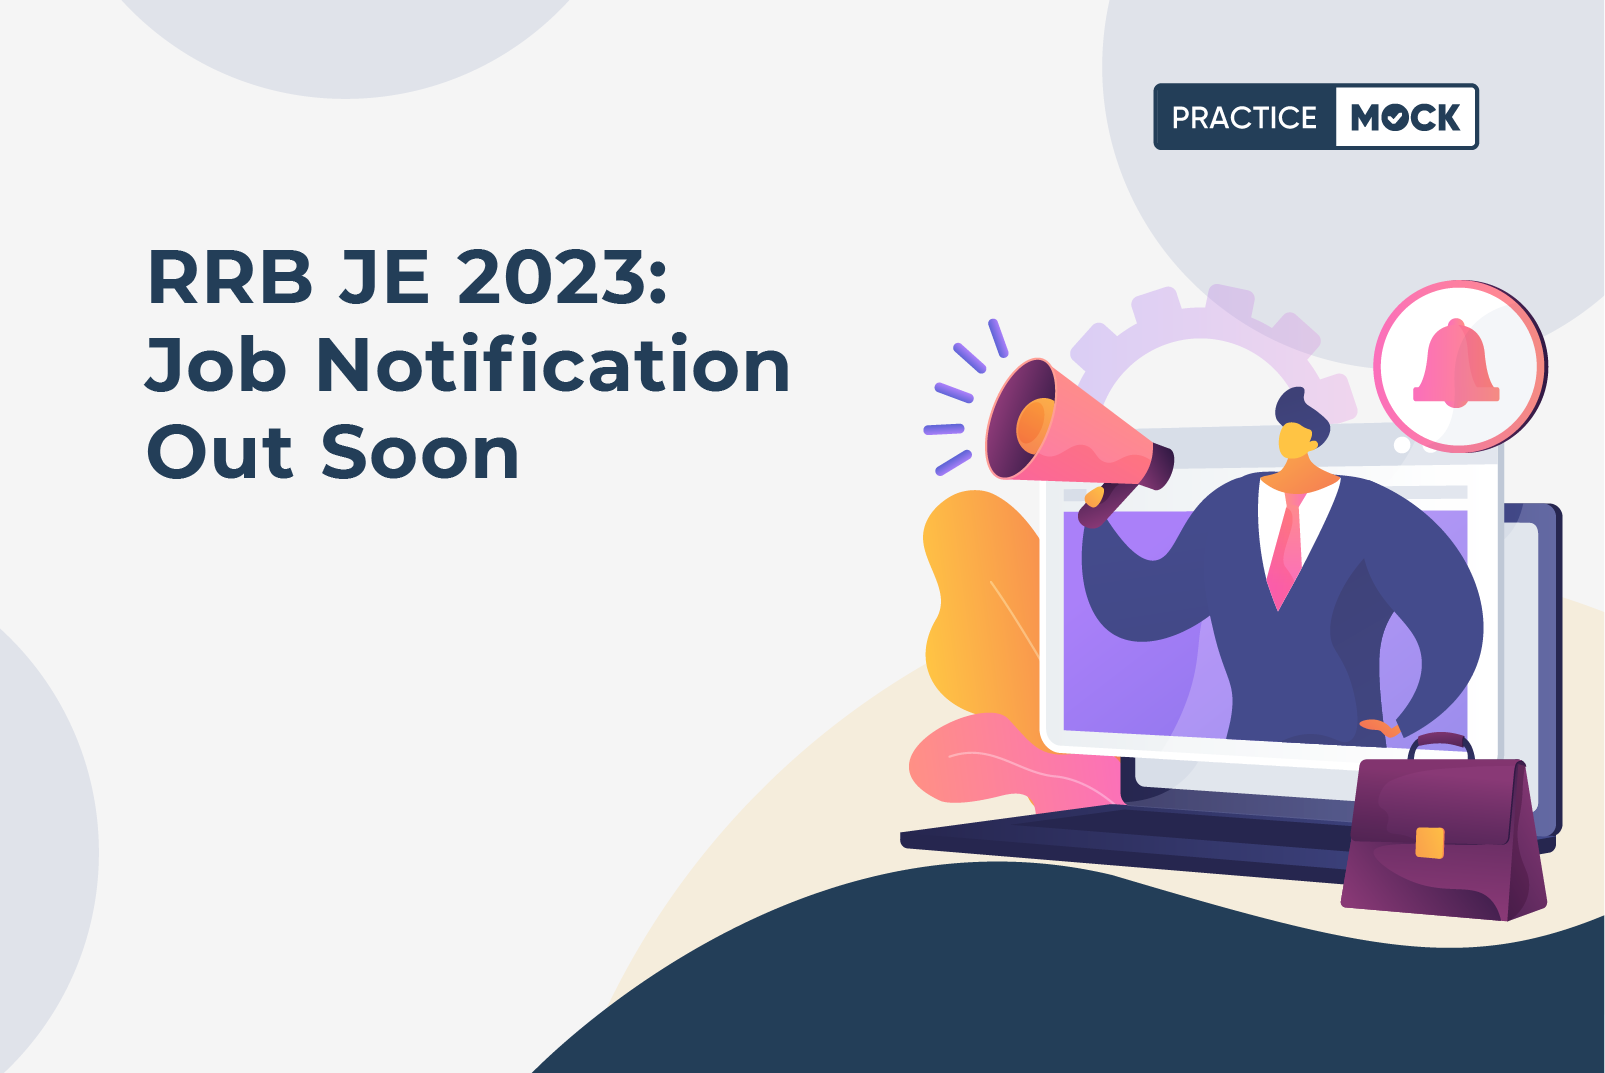 RRB JE 2023 Job Notification Out Soon